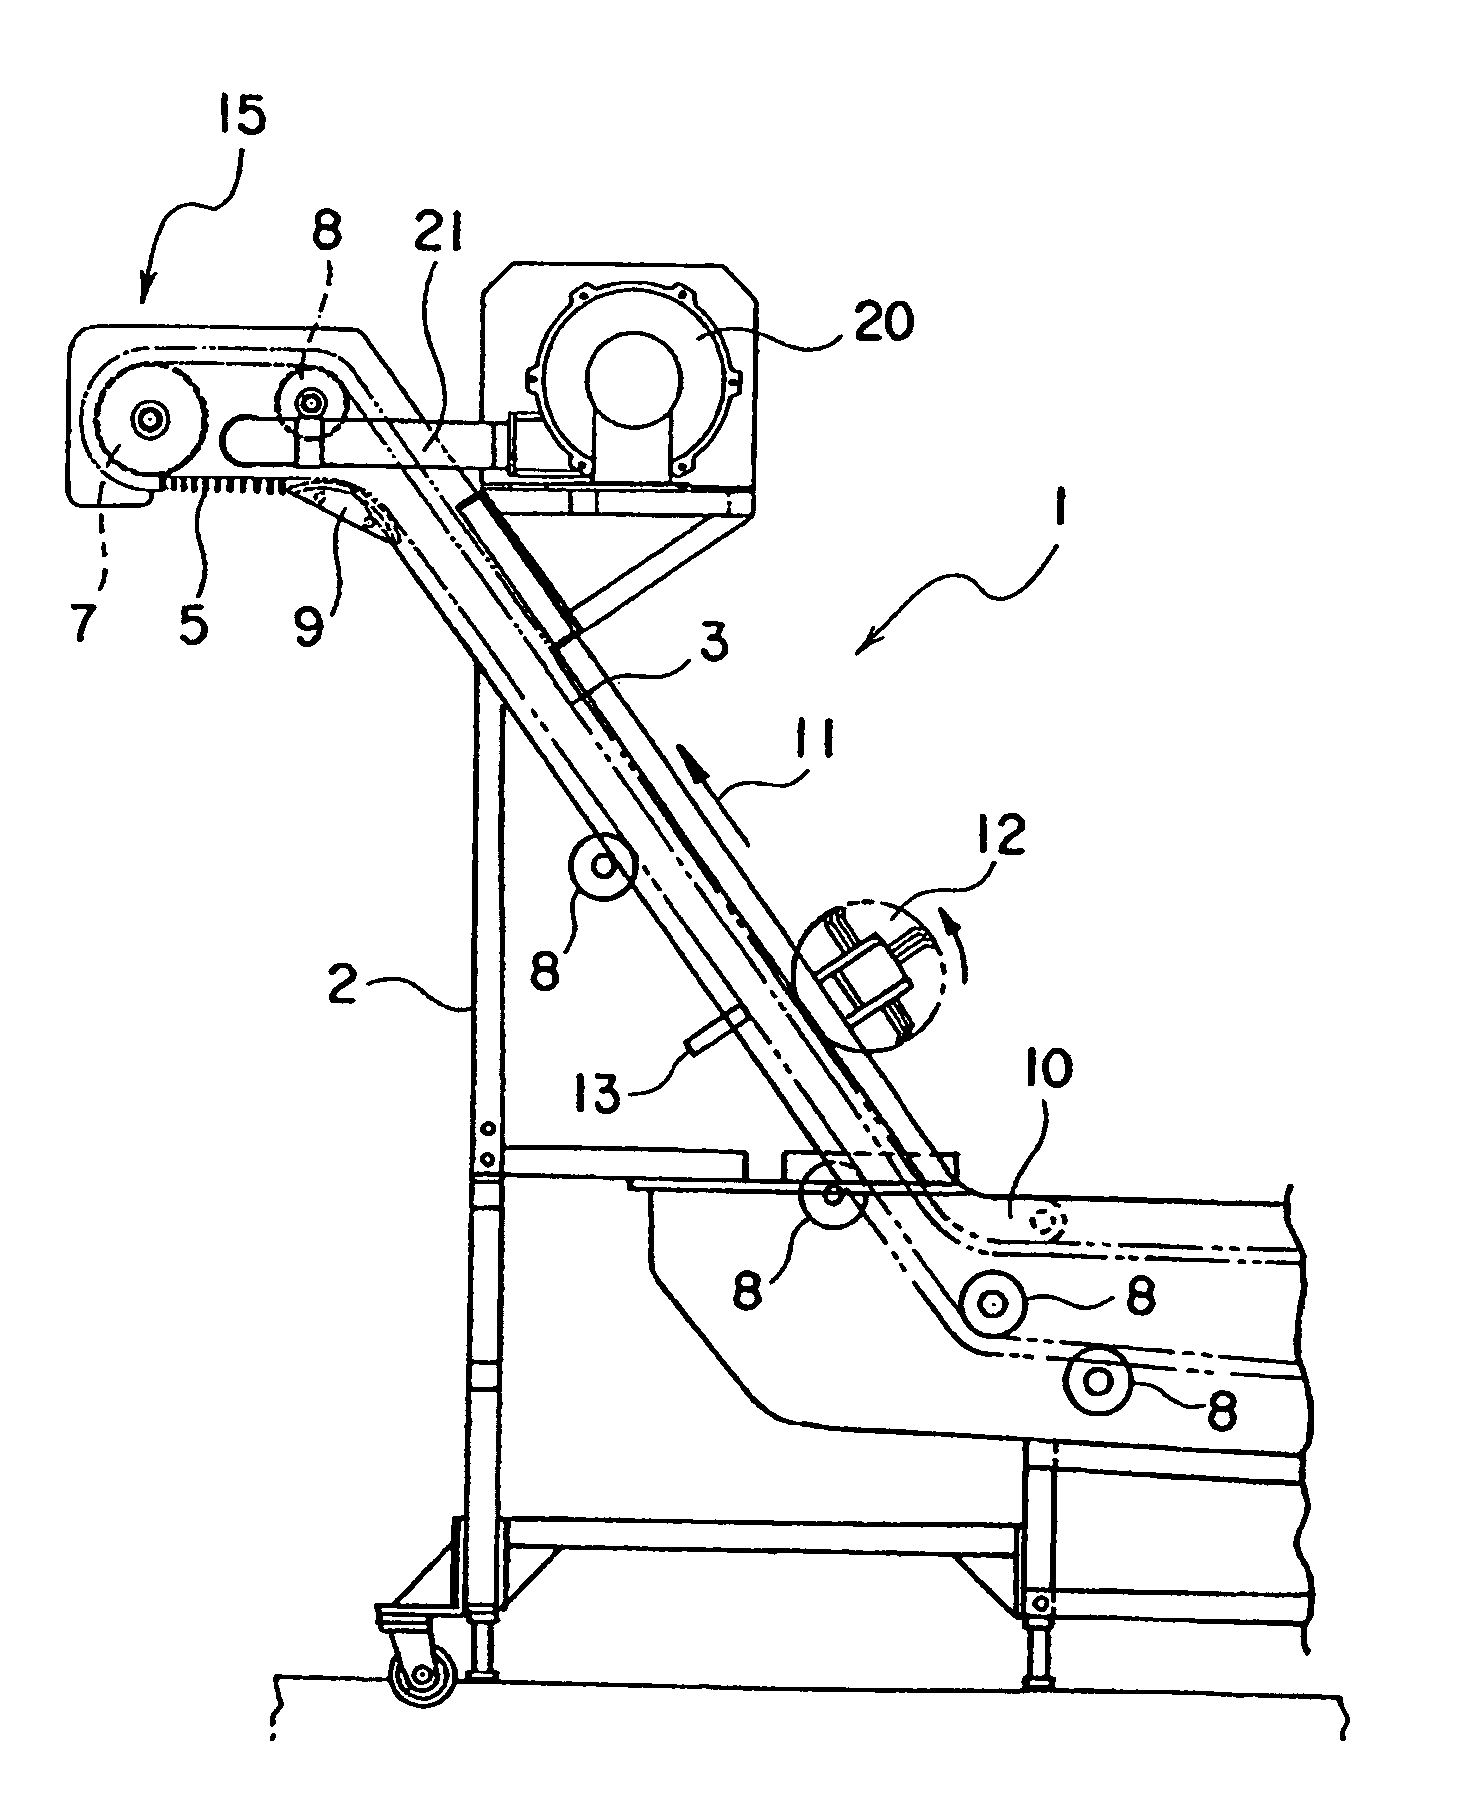 Bean sprouts-like articles transfer conveyor device